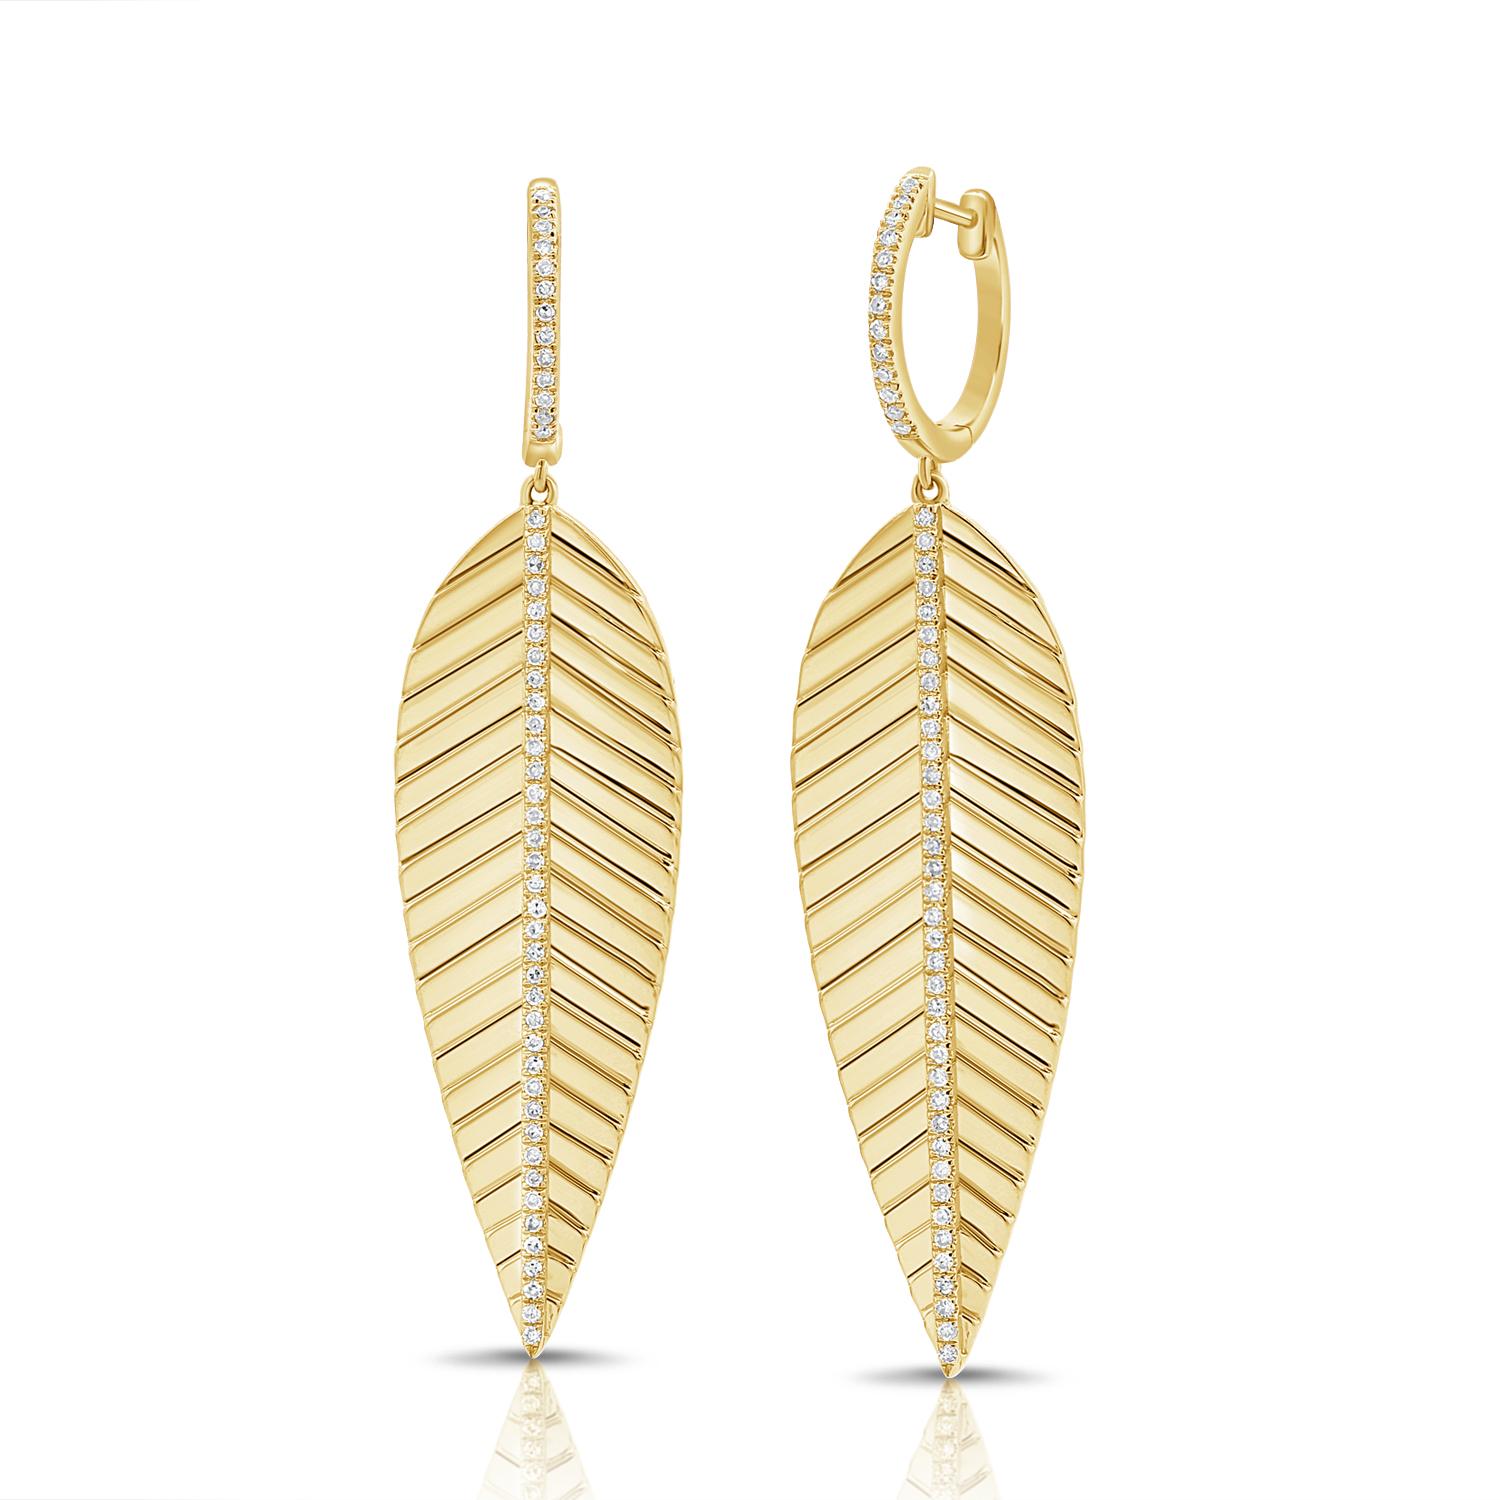 14K GOLD DIAMOND FEATHER DANGLE EARRINGS

- Diamond Weight: 0.32 ct.
-Diamond Count: 100
-Gold Weight: 10.76 grams (approx.)
-Earring Length: 2 inches

This piece is perfect for everyday wear and makes the perfect Gift! 

We certify that this is an